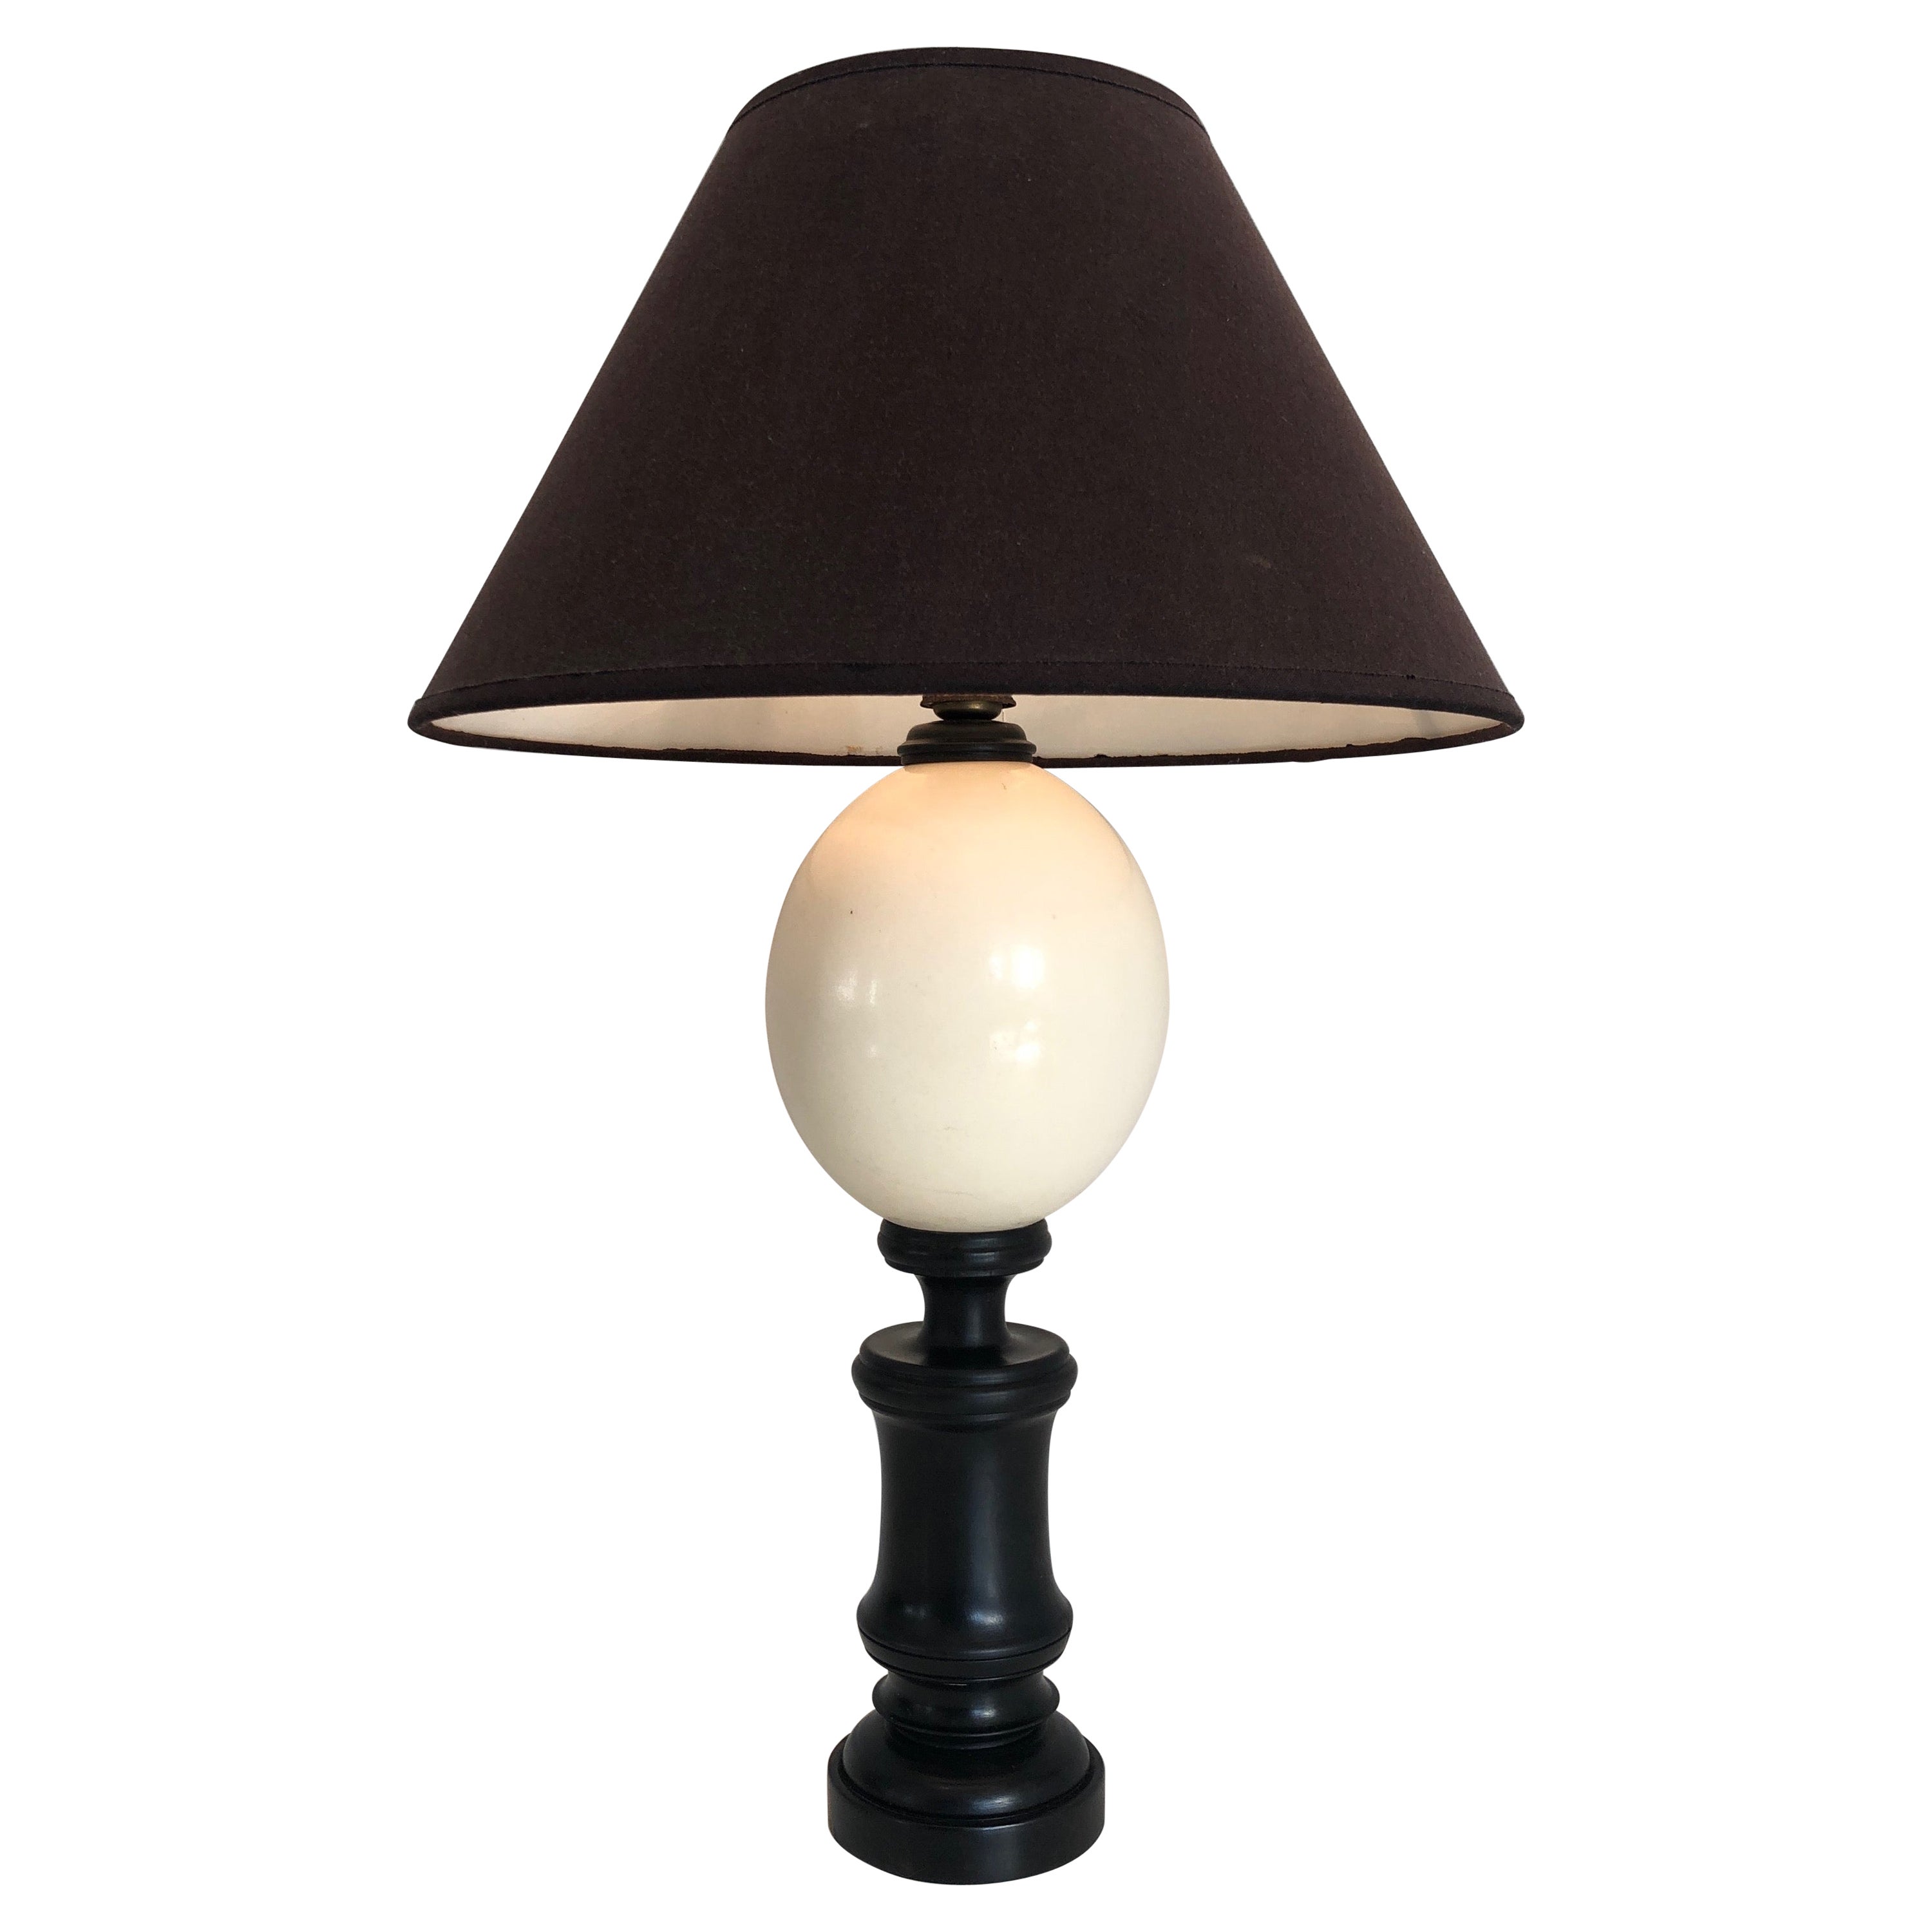 Blackened Wood and Ostrich Eggshell Table Lamp, French Work, Circa 1970